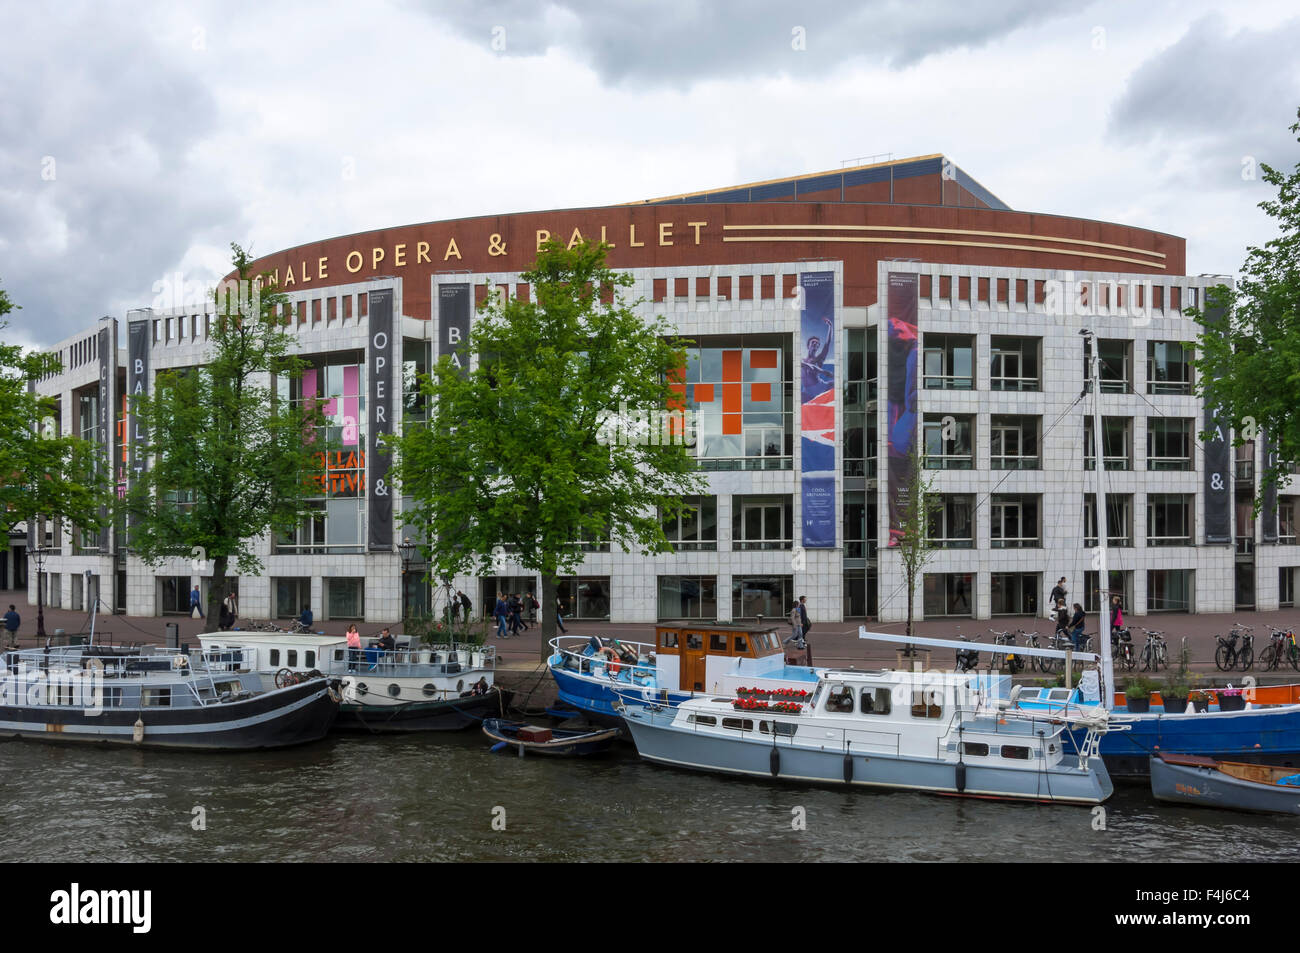 National Opera and Ballet Venue, Amsterdam, The Netherlands, Europe Stock Photo